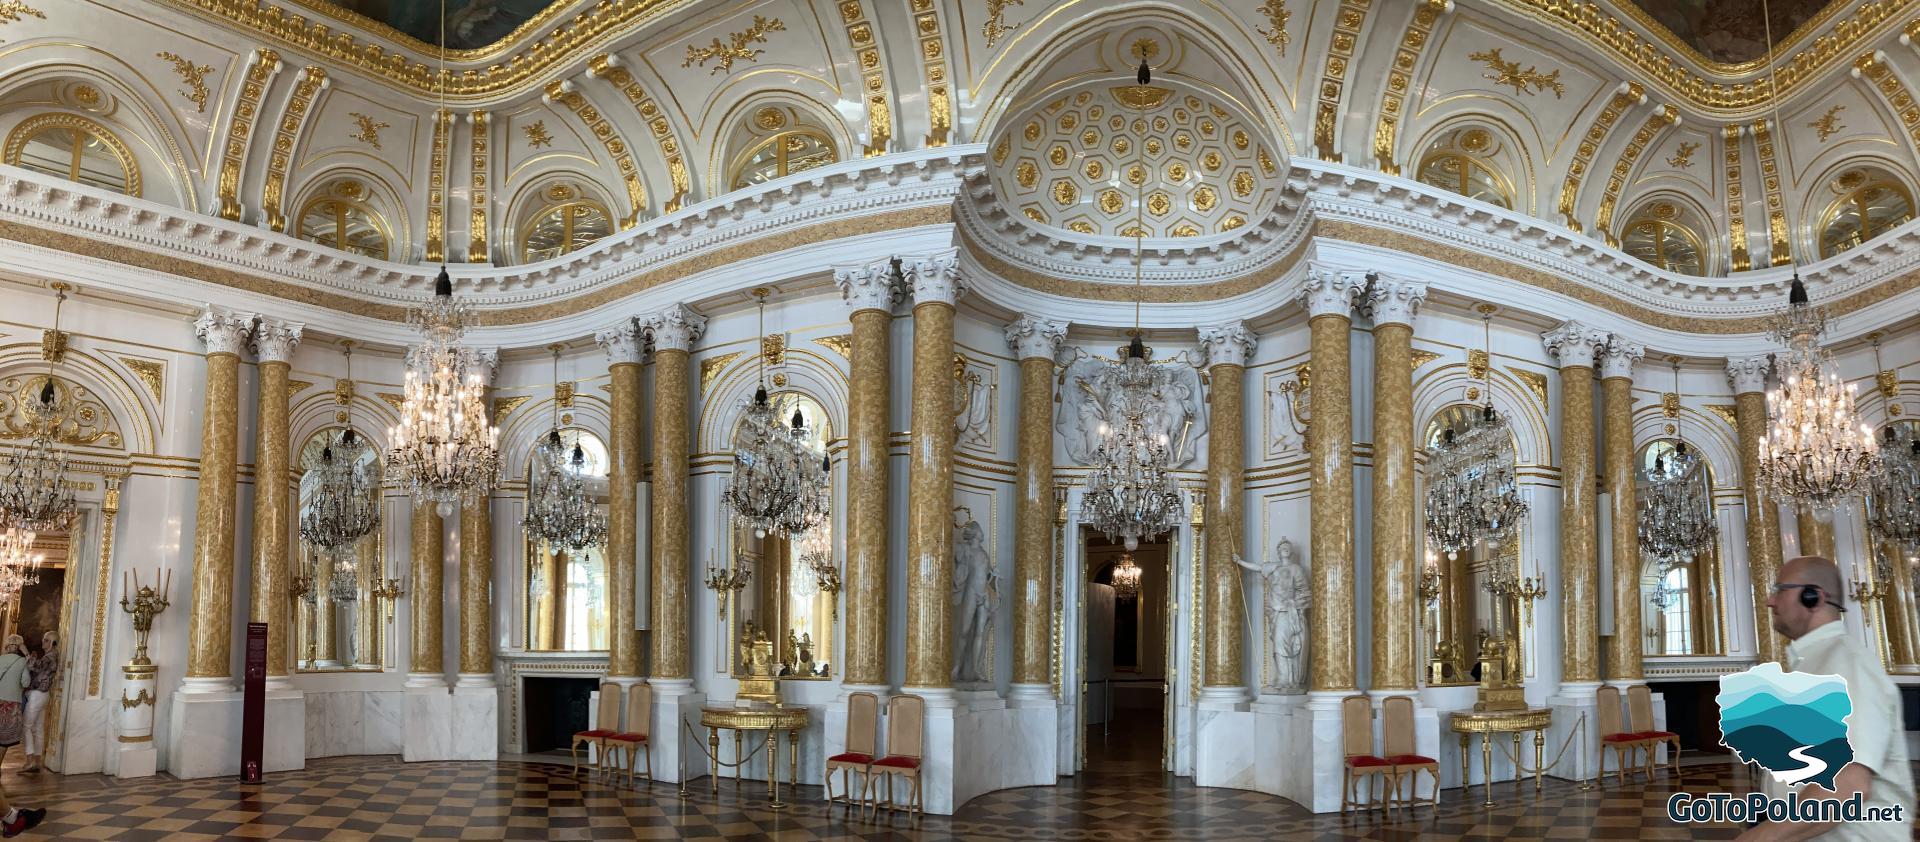 a ceremonial ballroom in the castle, a checkerboard floor, crystal chandeliers, yellow columns with Corinthian capitals, Roman style sculptures, yellow, white and golden ornaments dominate